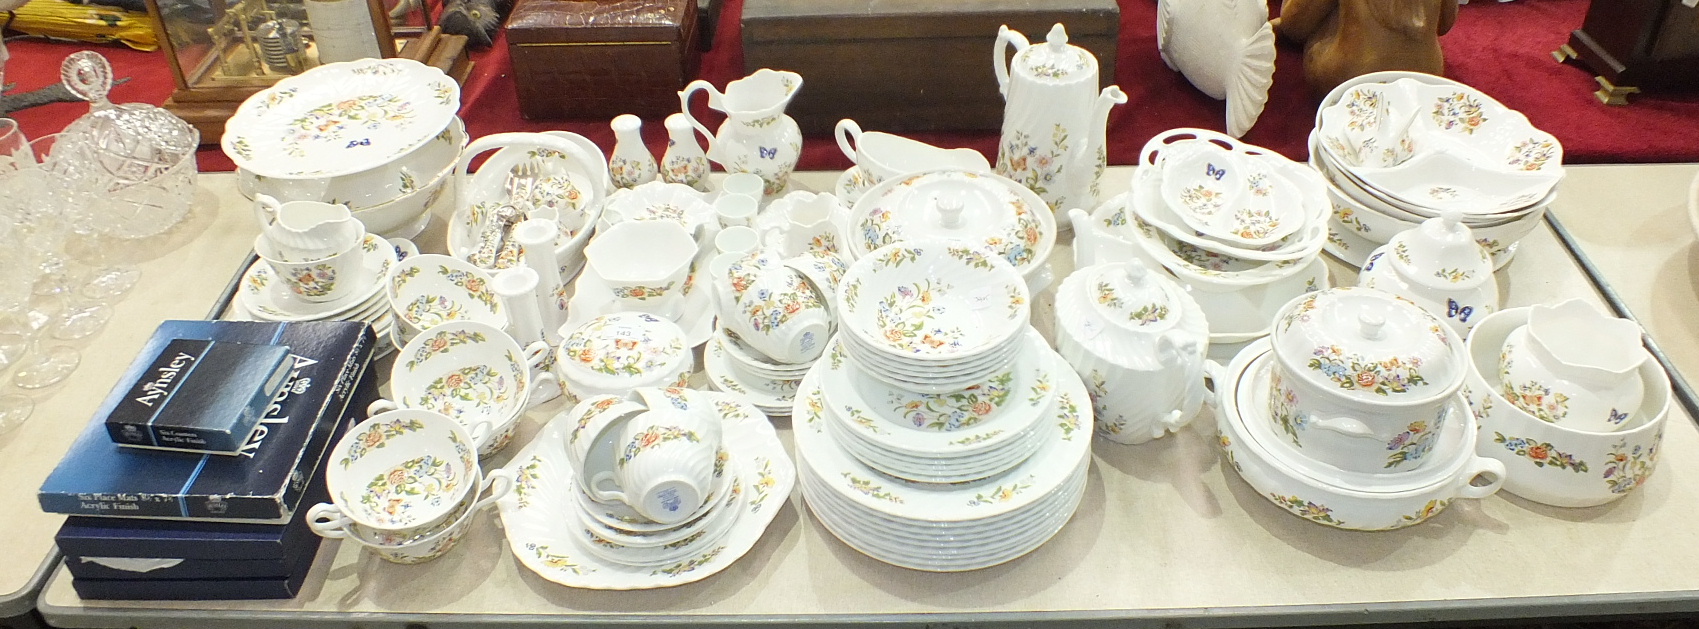 Approximately one hundred pieces of Aynsley 'Cottage Garden' decorated tea and dinner ware, bowls,